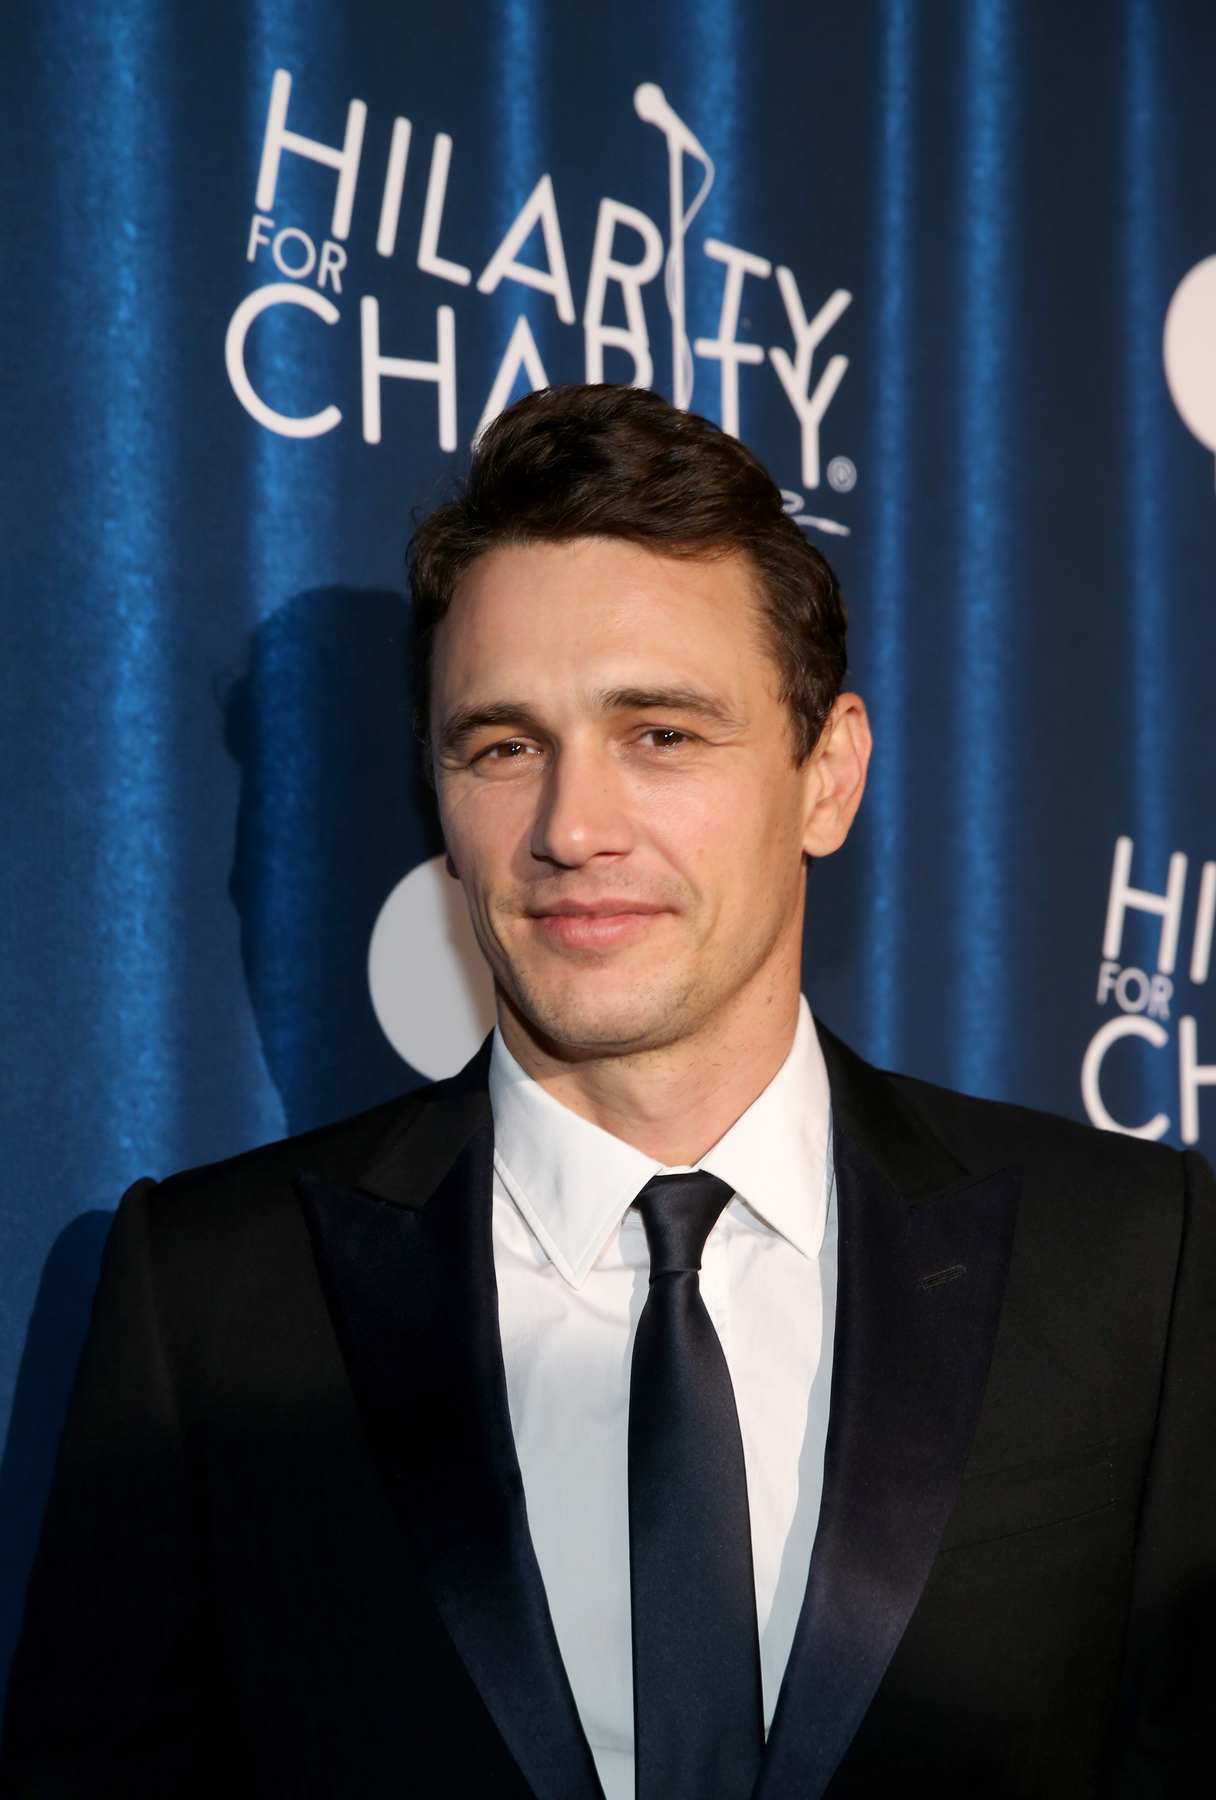 James Franco attends Hilarity for Charitys Annual Variety Show